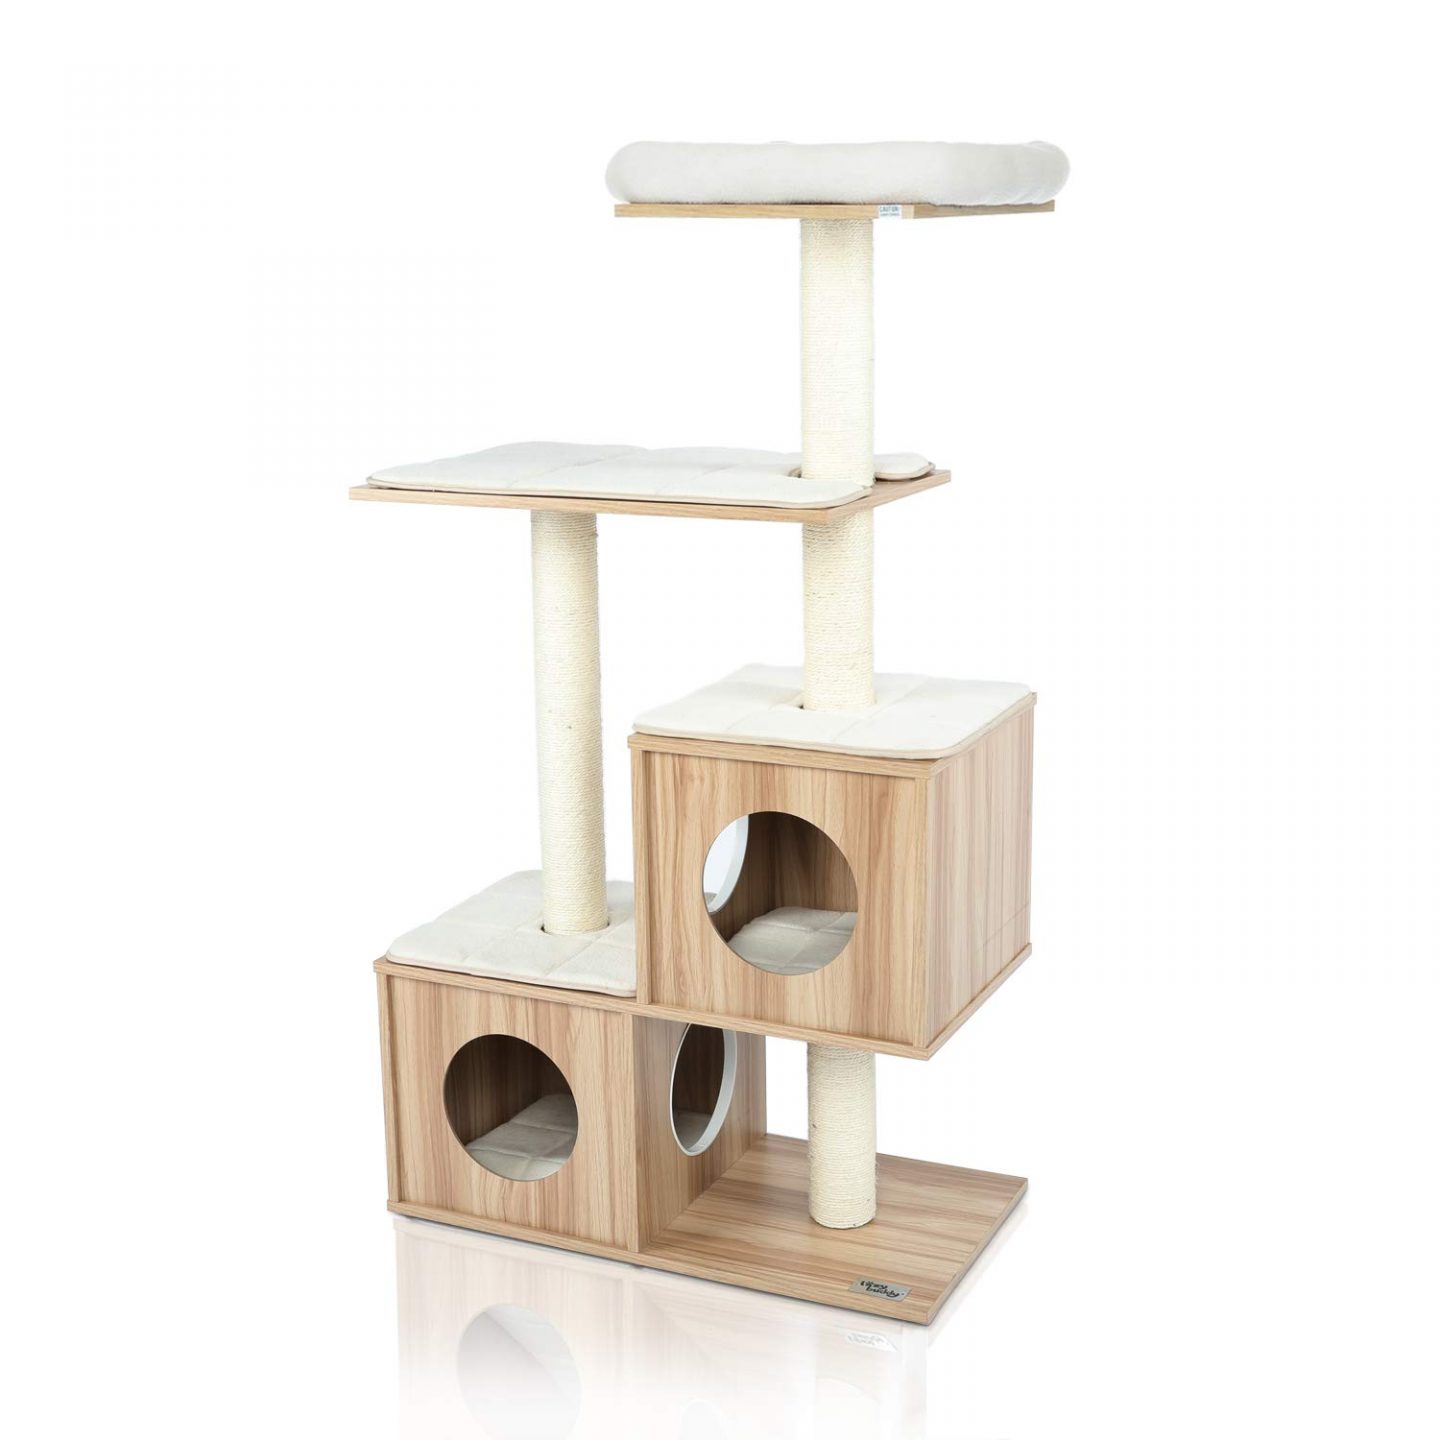 Wood Cat Tree No Carpet - Did you think wooden cat trees NO CARPET were just a dream? Think Again. This affordable model does not collect pet hair, has removable pads and is totally GEORGEOUS!